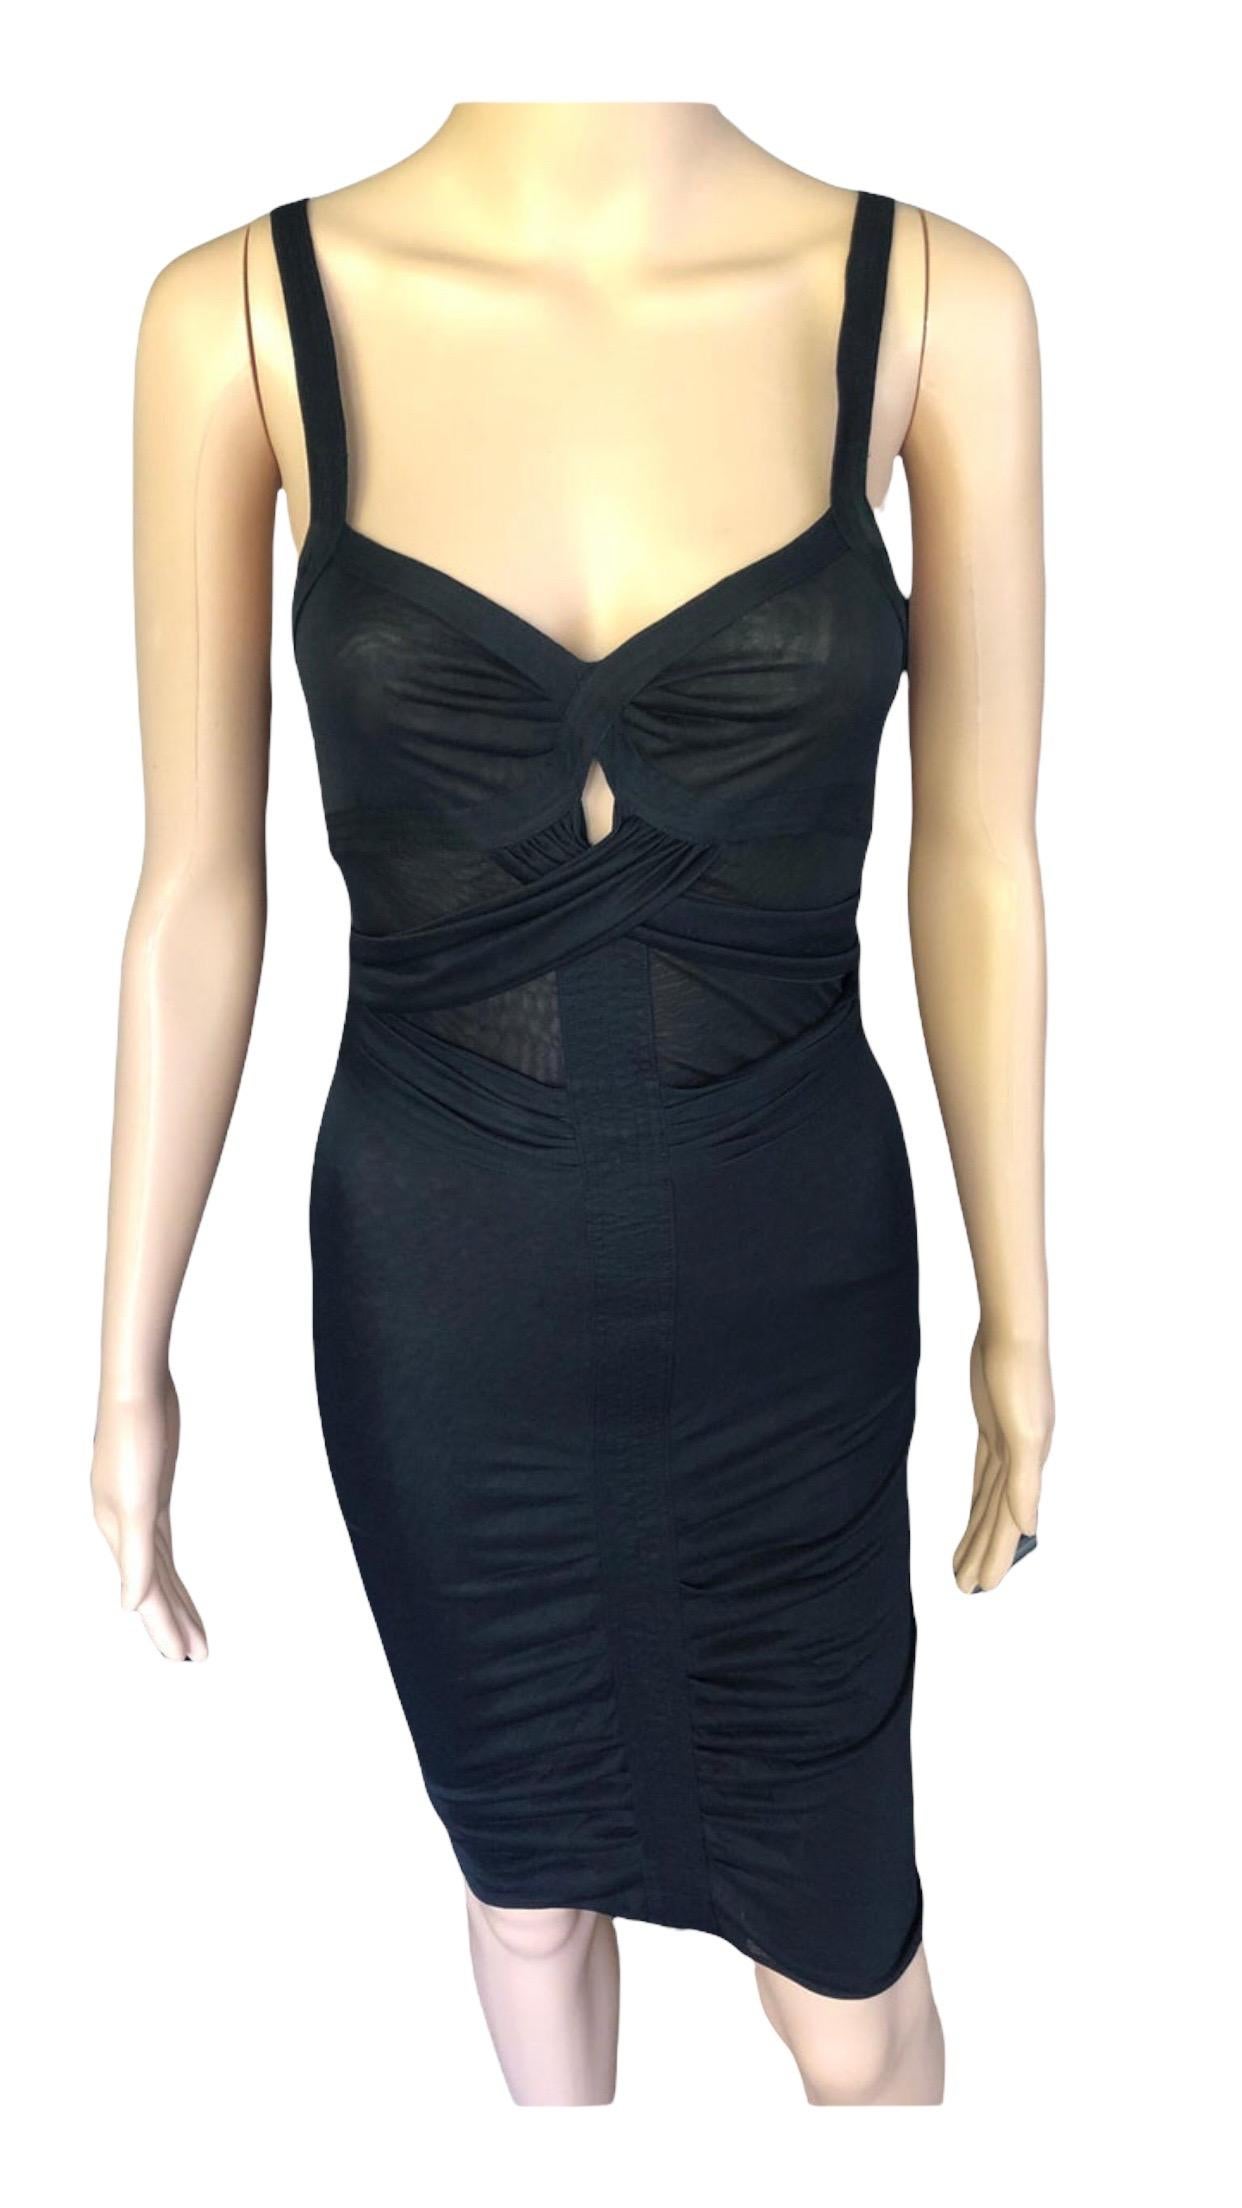 1990'S Gucci by Tom Ford Semi-Sheer Knit Bodycon Black Dress In Good Condition For Sale In Naples, FL